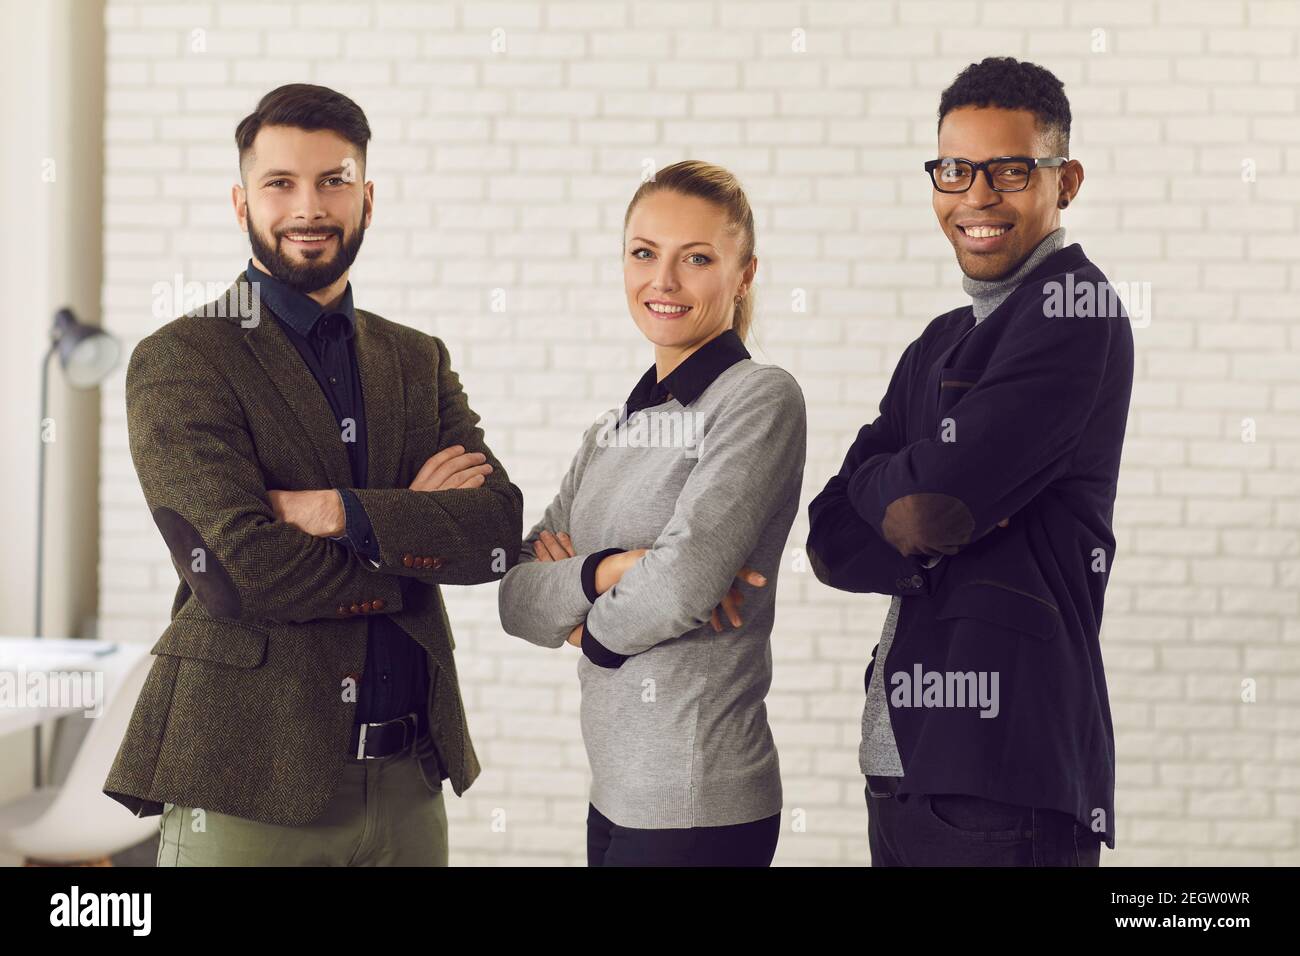 Multiethnic mixed race group of smiling business partners coworkers Stock Photo